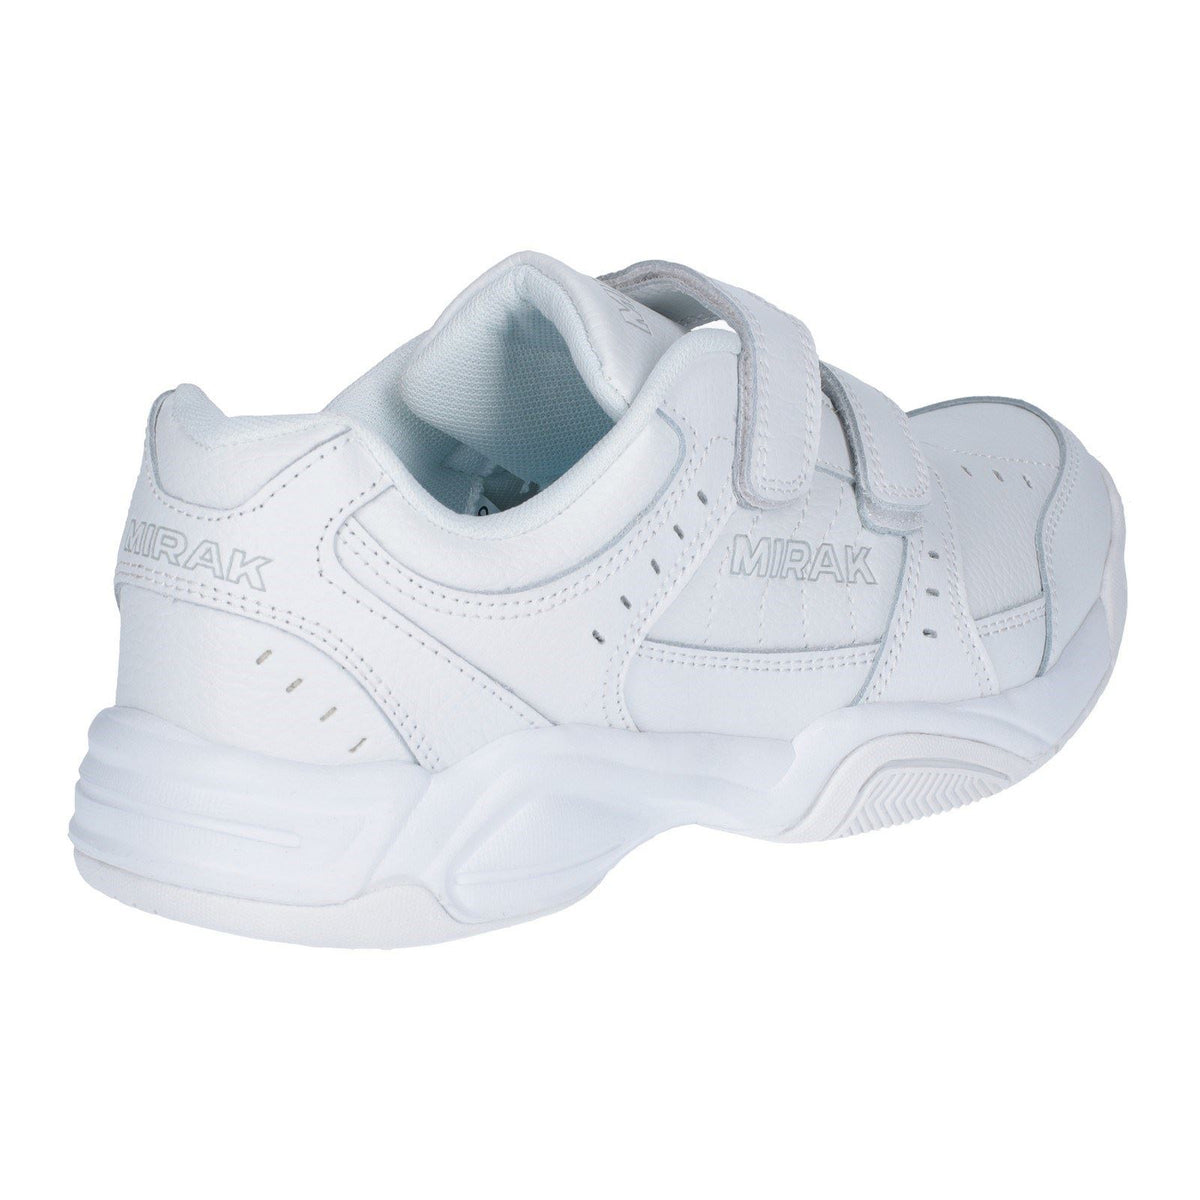 Mirak Contender Touch Fastening Mens Trainers